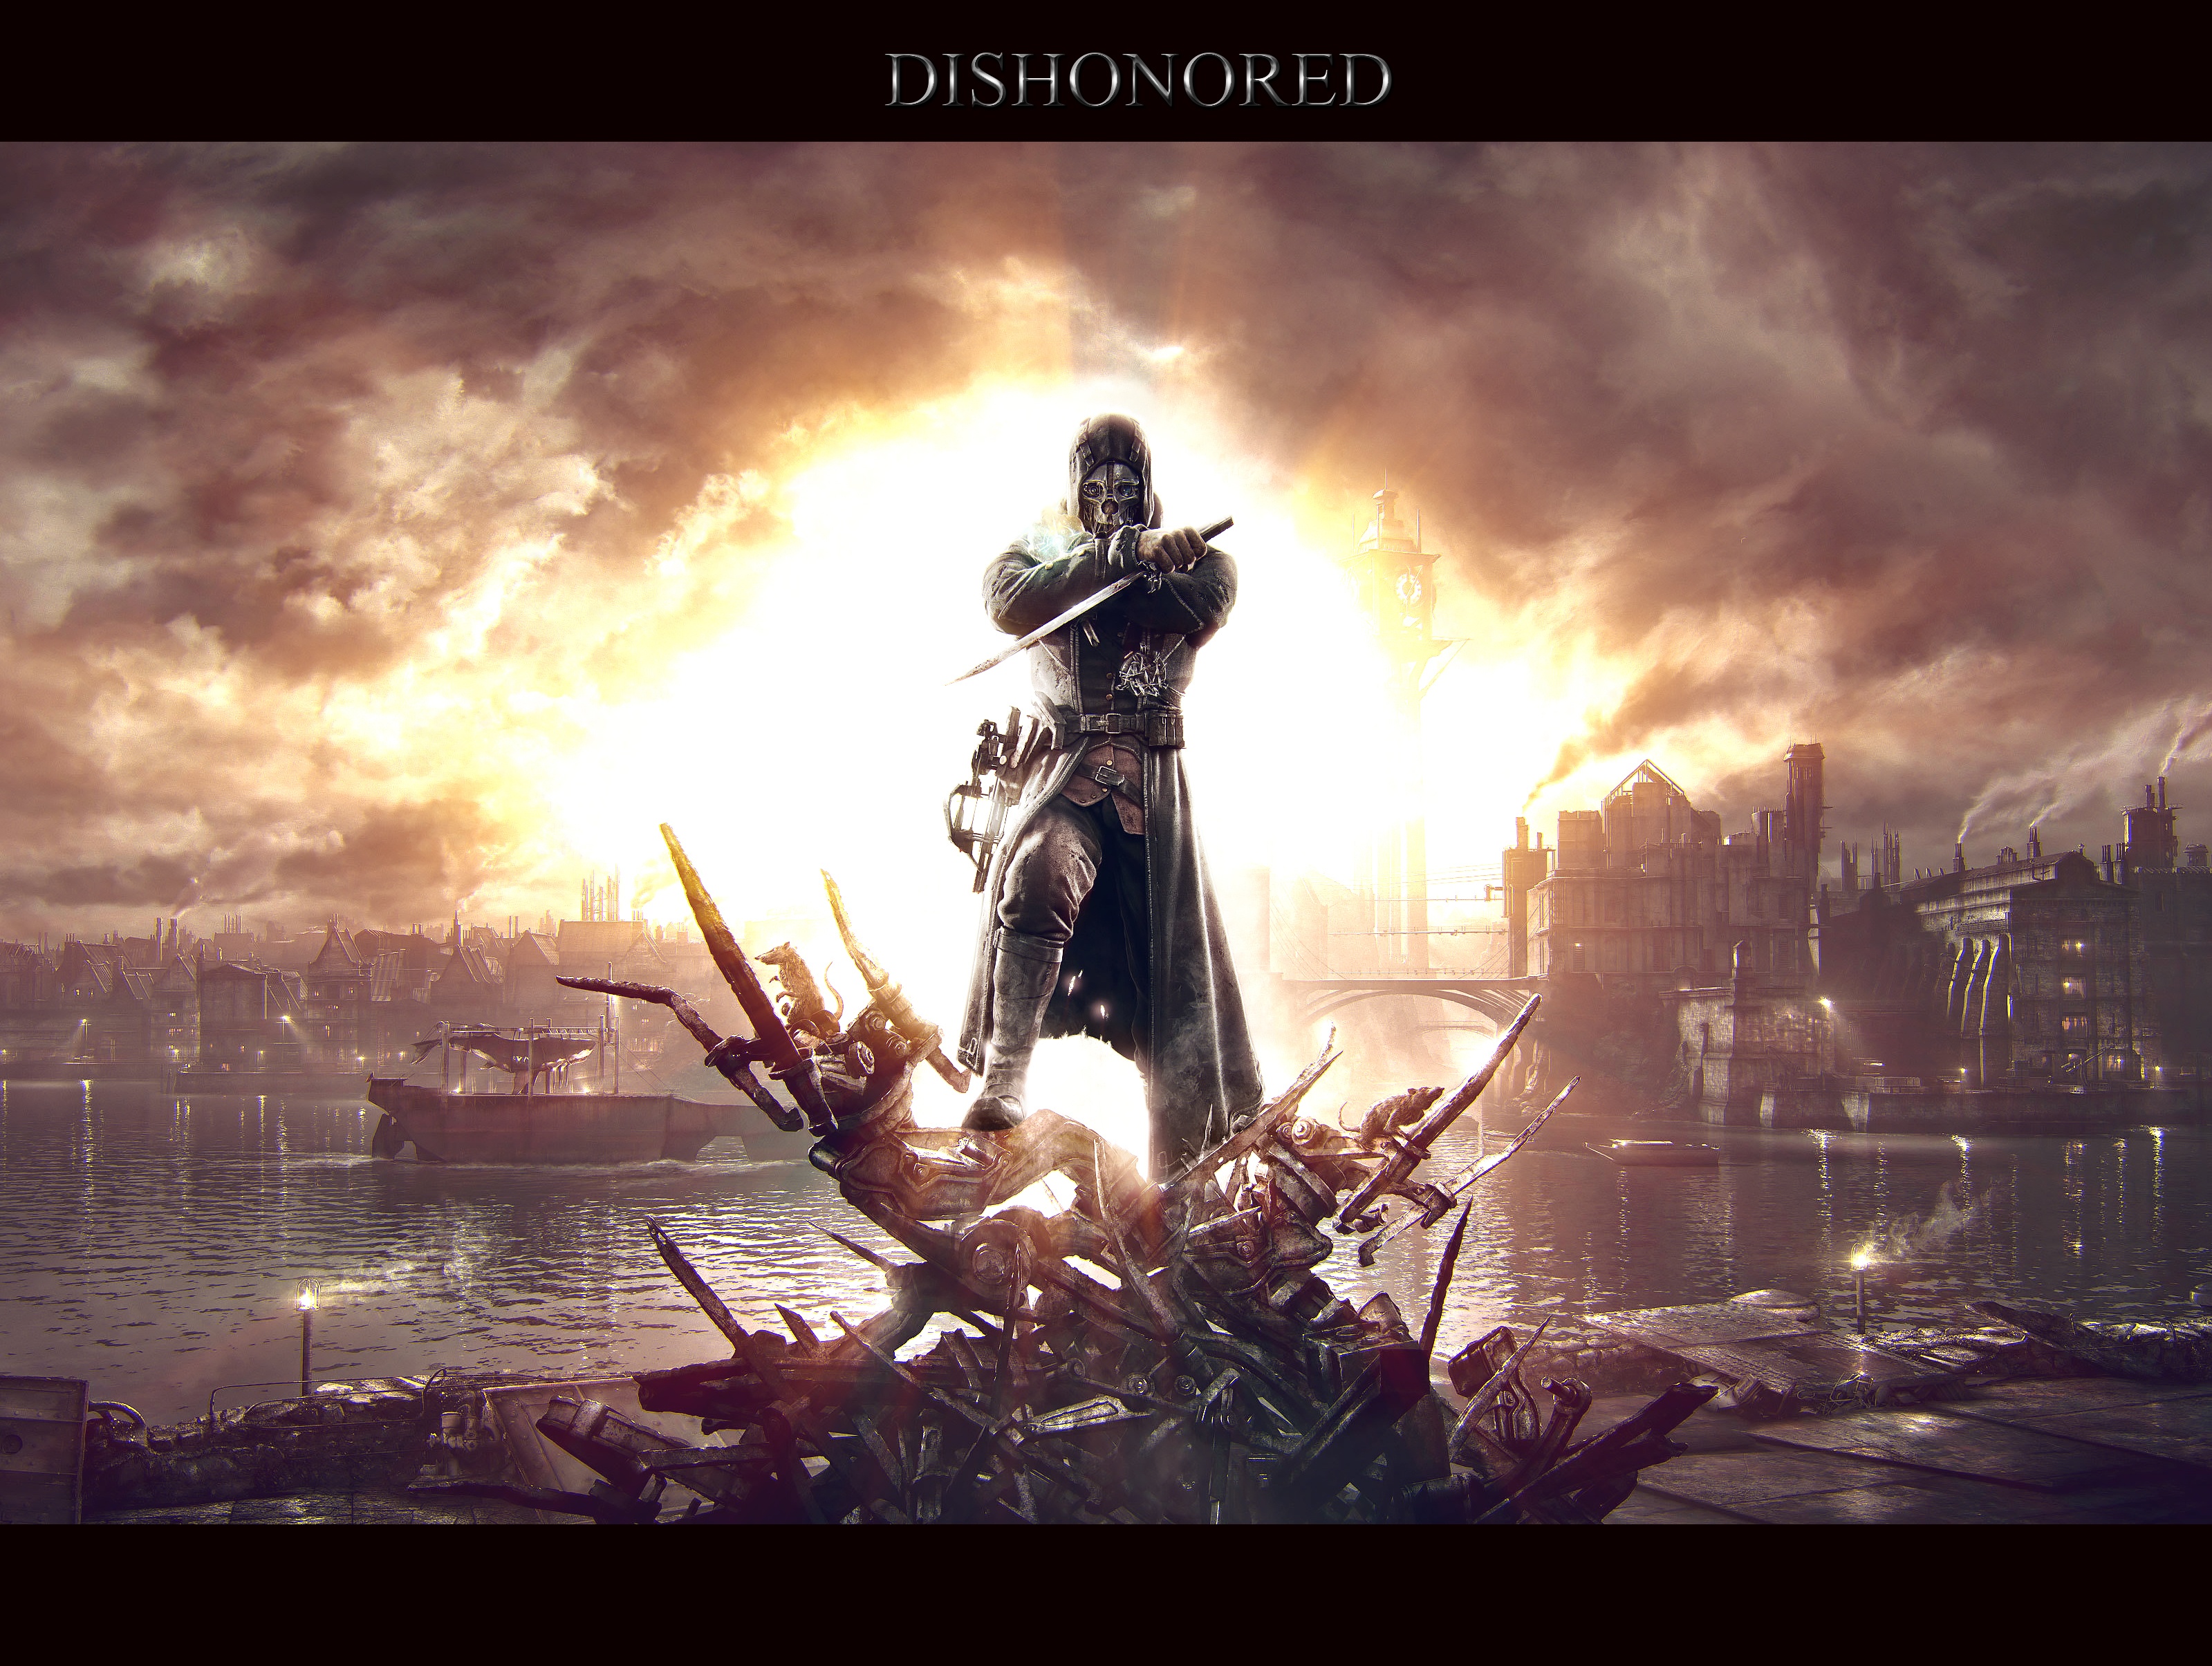 Photos Dishonored Warriors Games 3199x2410 warrior vdeo game